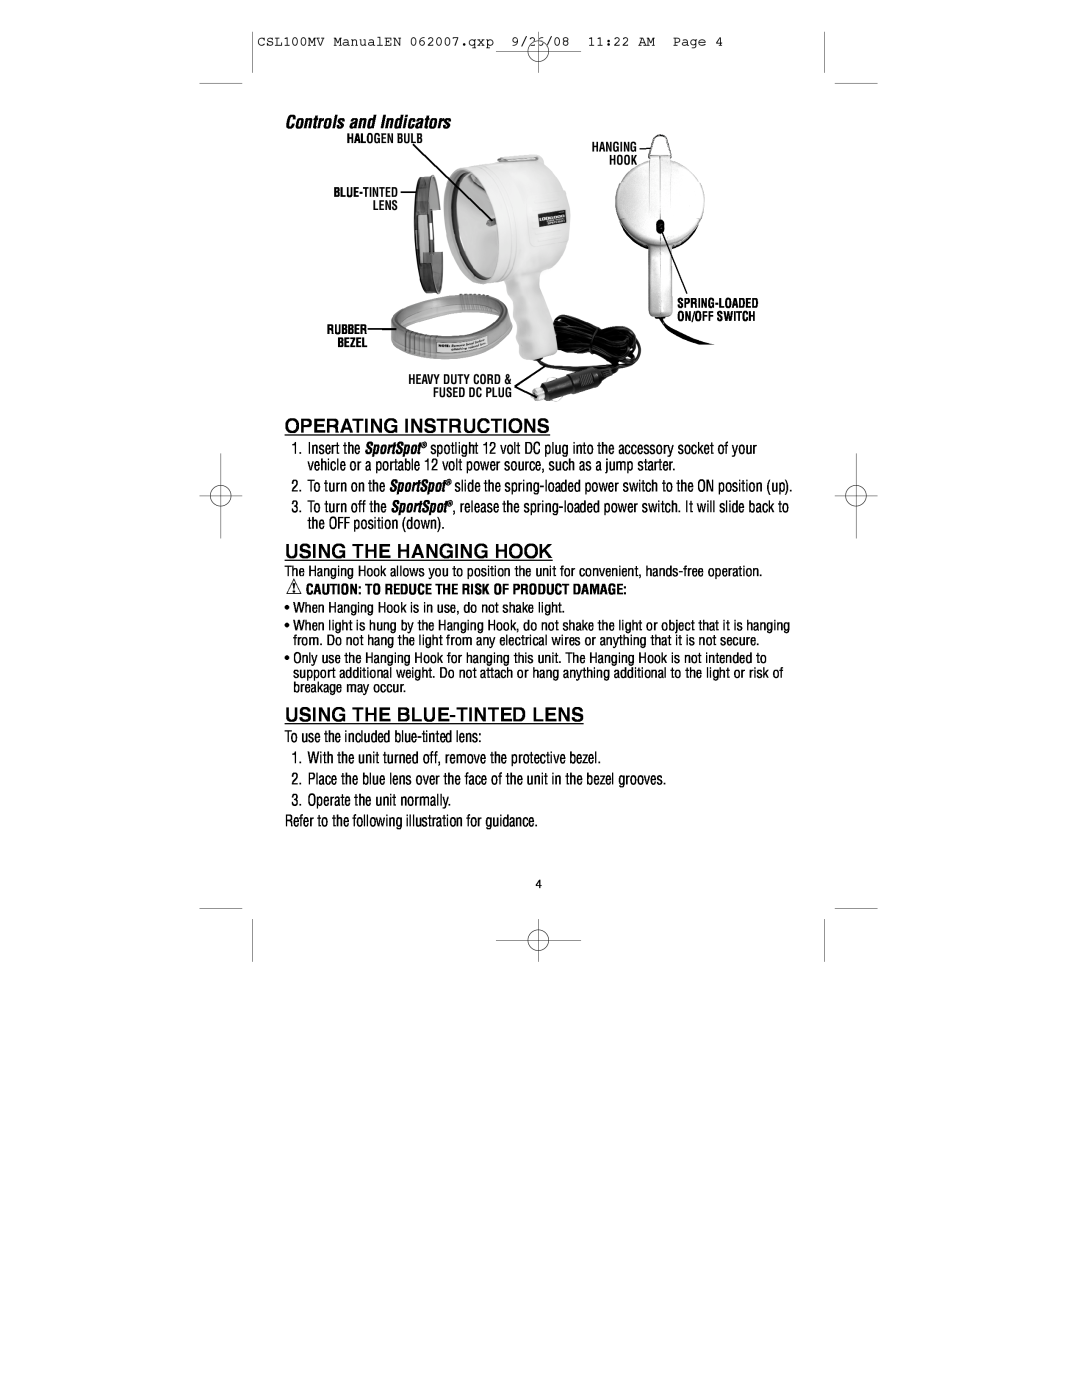 Black & Decker 1, 000 Operating Instructions, Using The Hanging Hook, Using The Blue-Tinted Lens, Controls and Indicators 